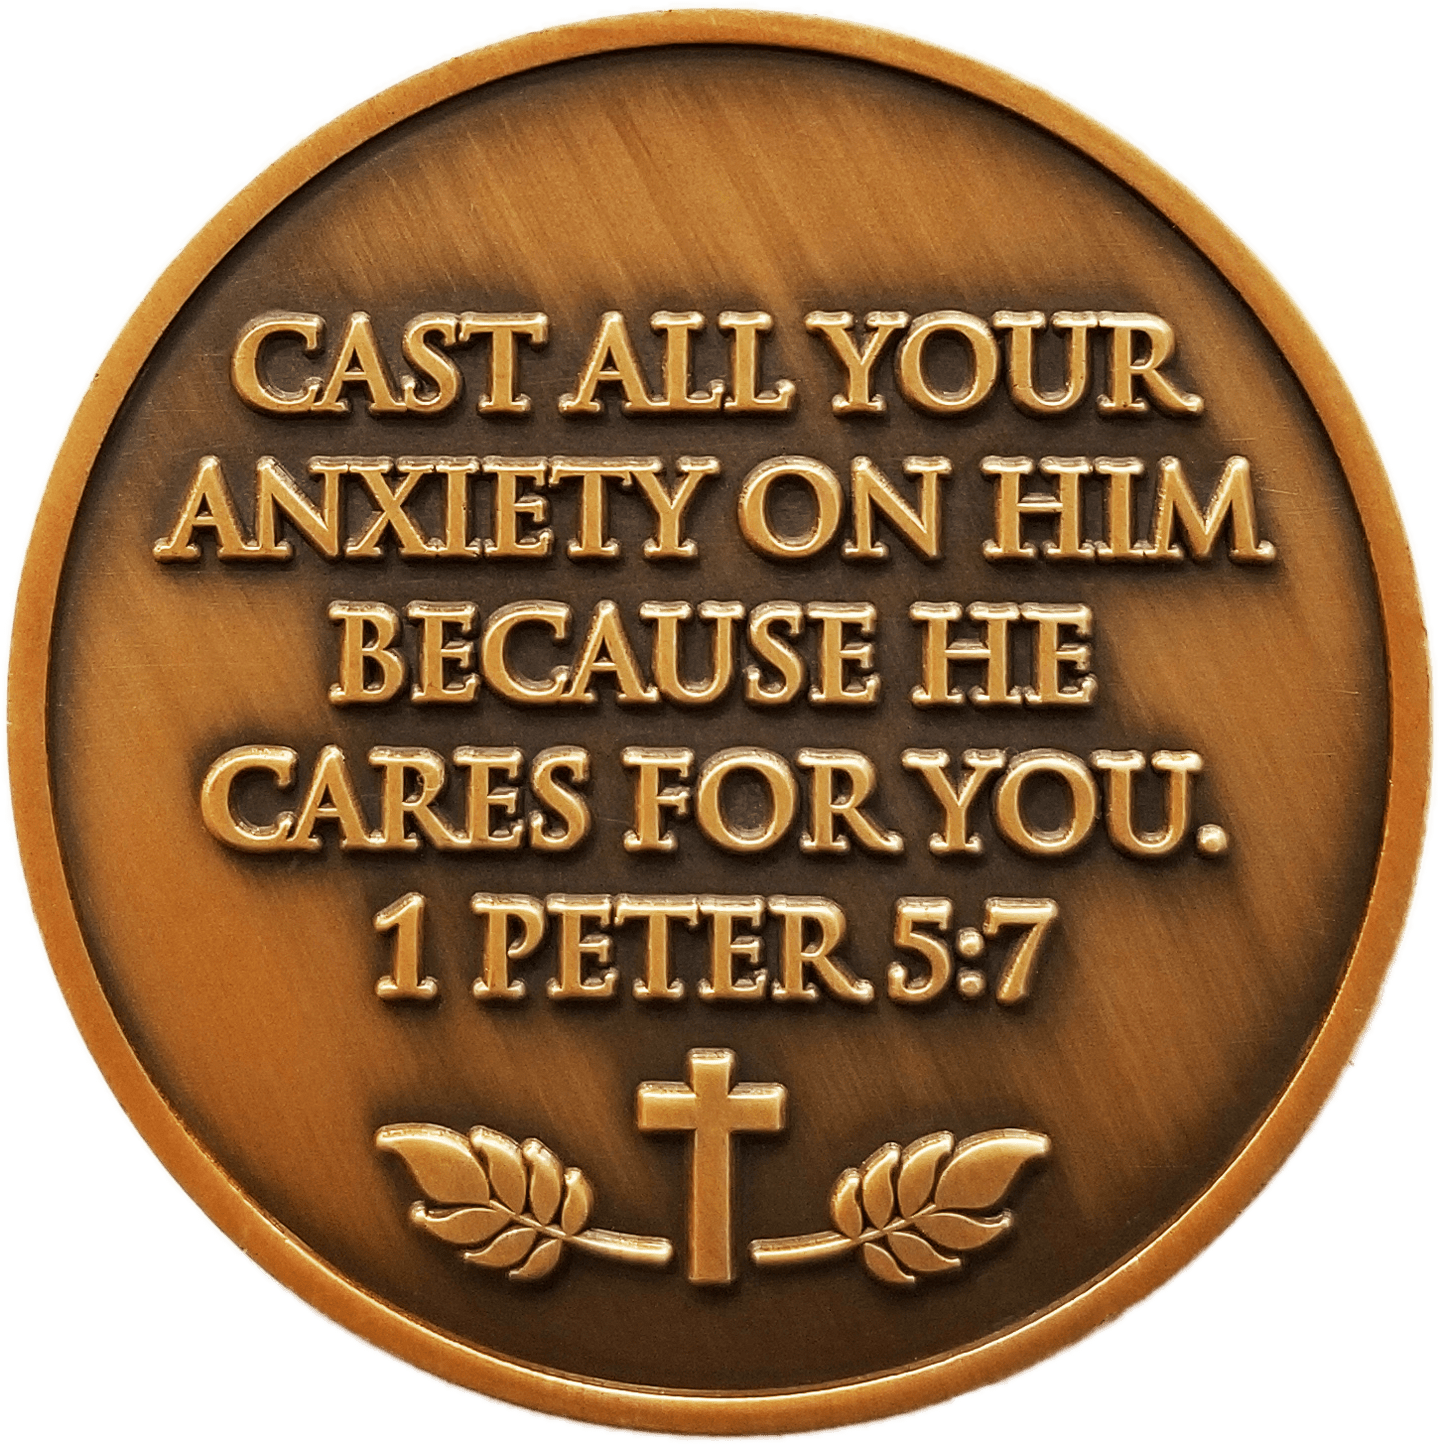 Back: "Cast all your anxiety on him because he cares for you. 1 Peter 5:7"